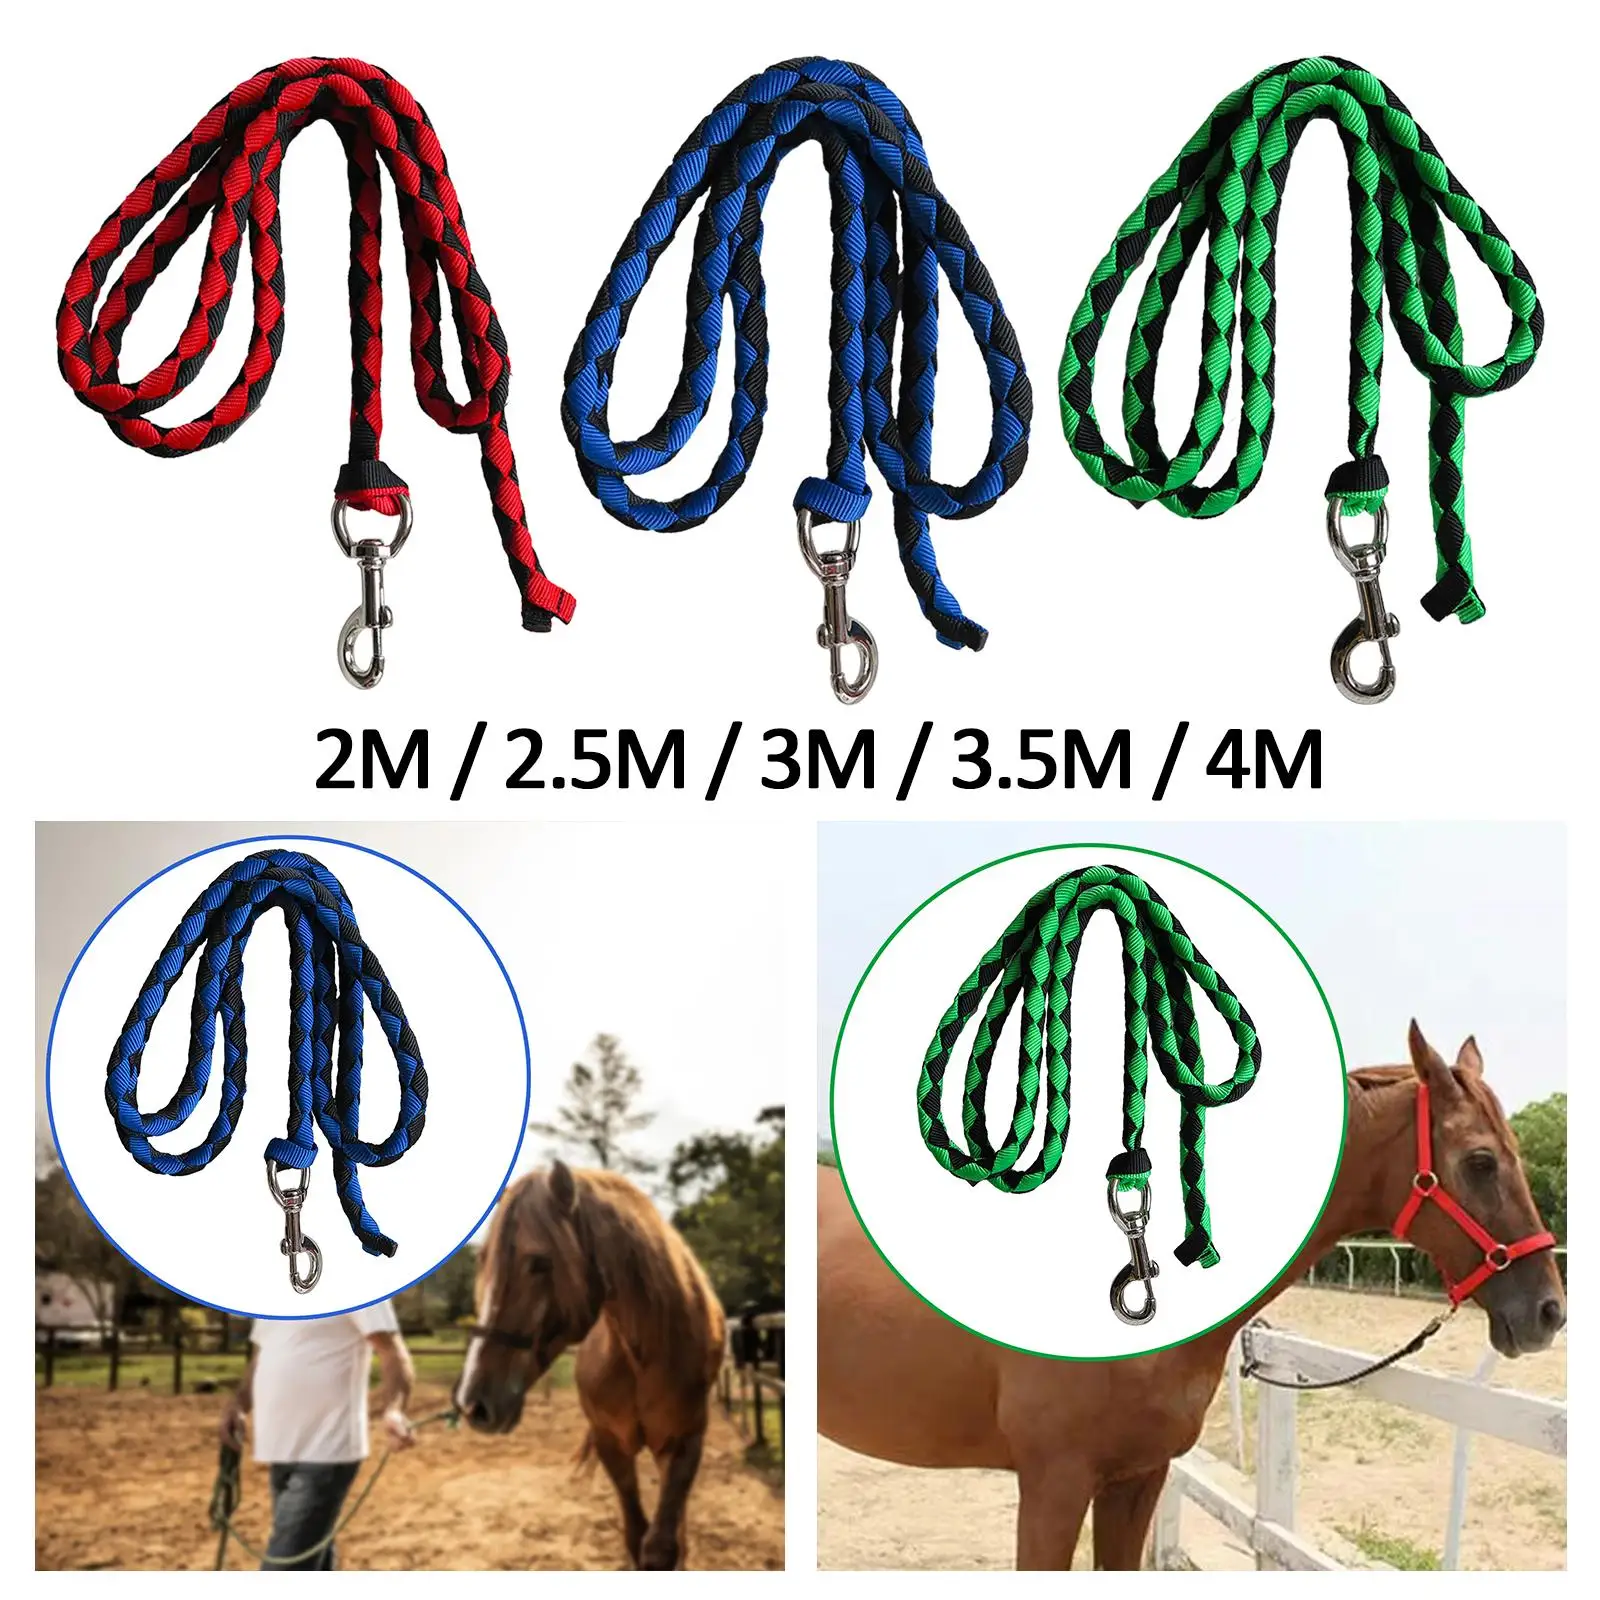 Horse Lead Rope for Pony, Donkey, Goat Practical Strong Durable Rein Horse